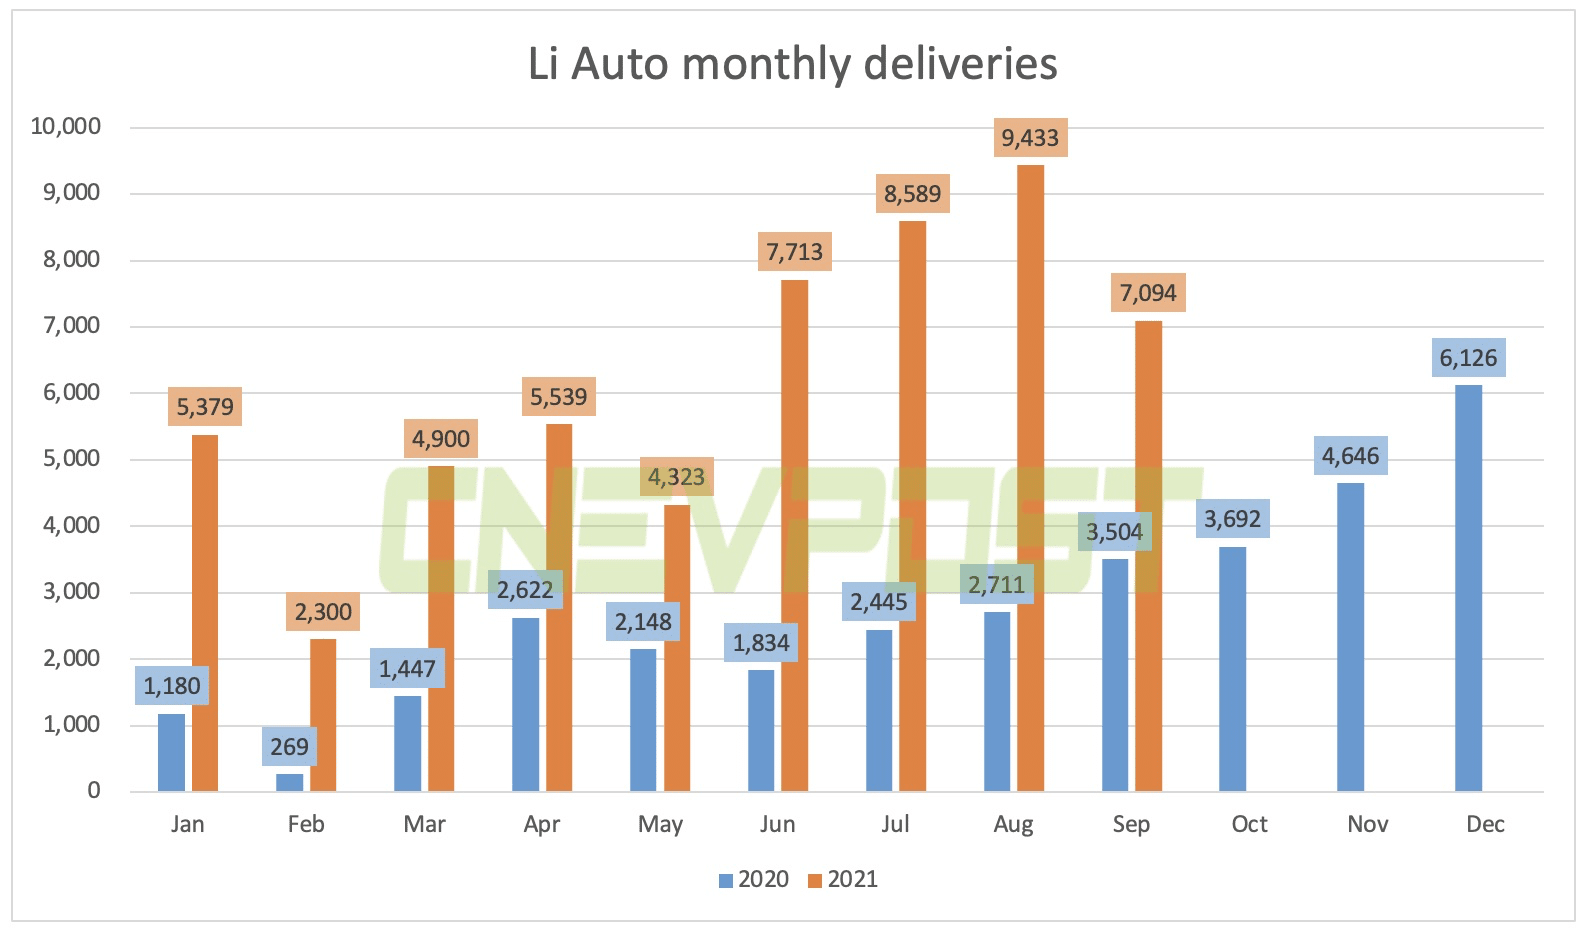 Li Auto delivered 7,094 vehicles in Sept, up 102% from a year ago-CnEVPost